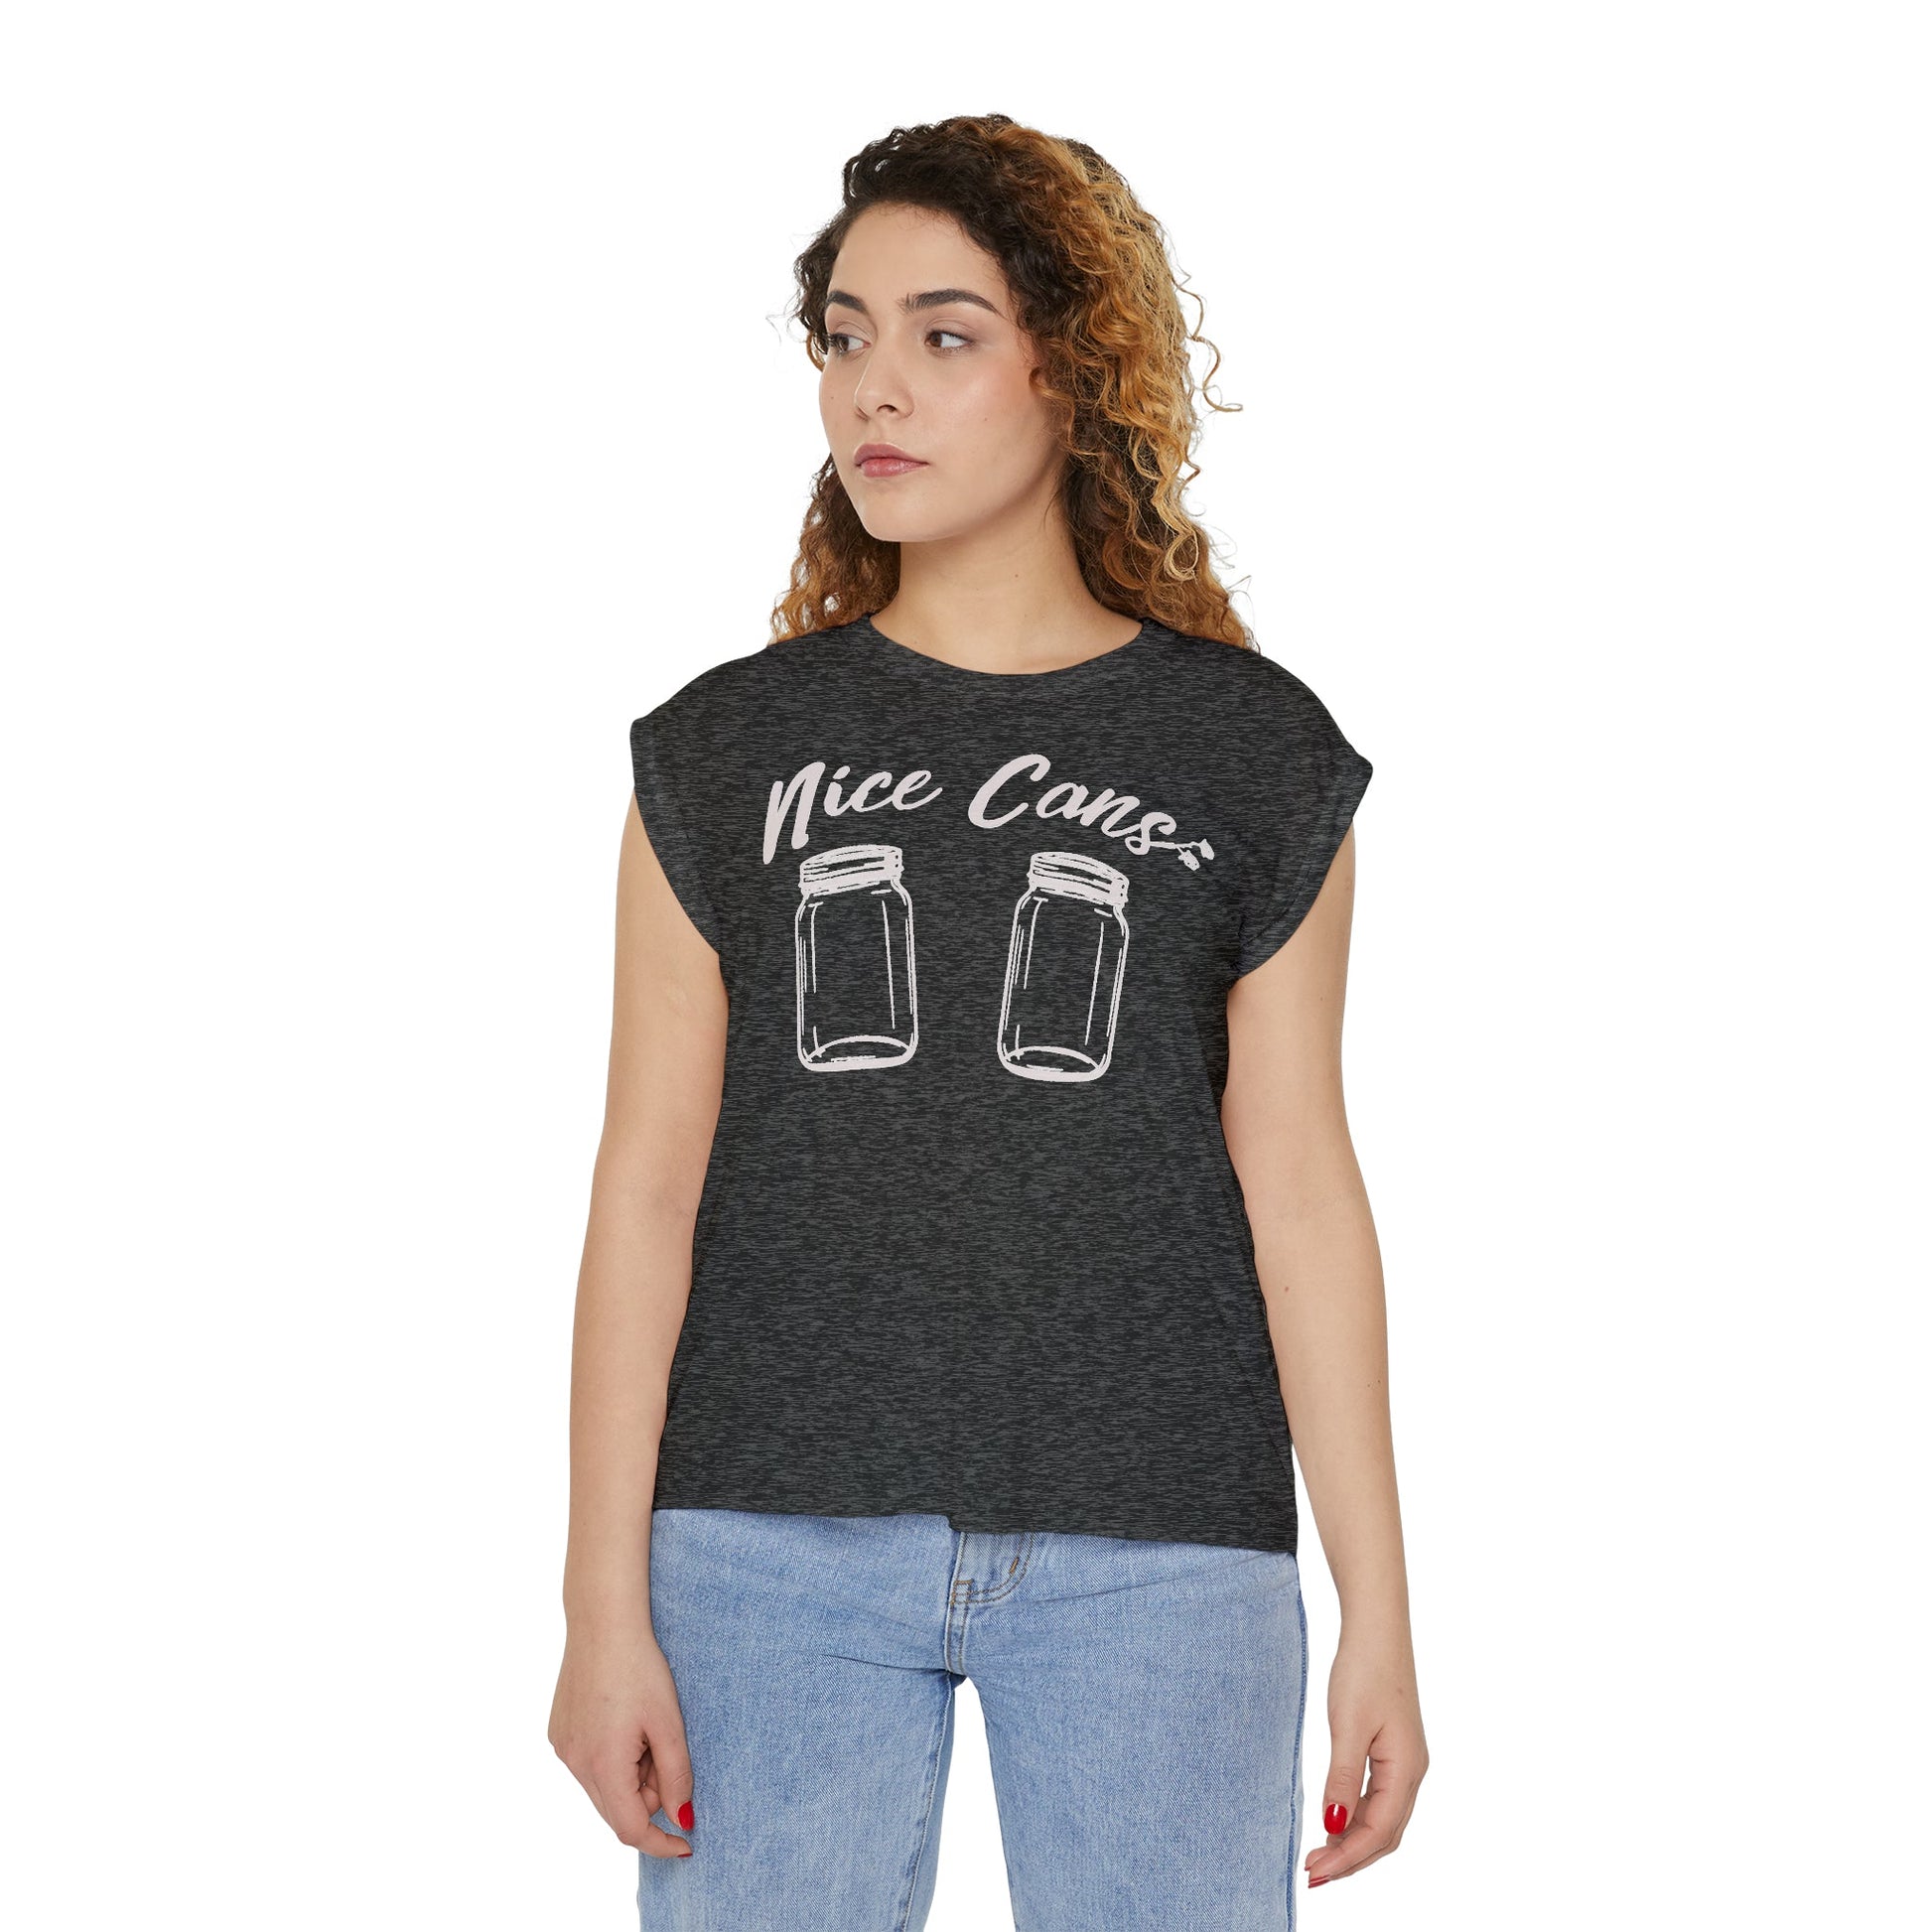 Nice Cans Women’s Flowy Rolled Cuffs Muscle Tee